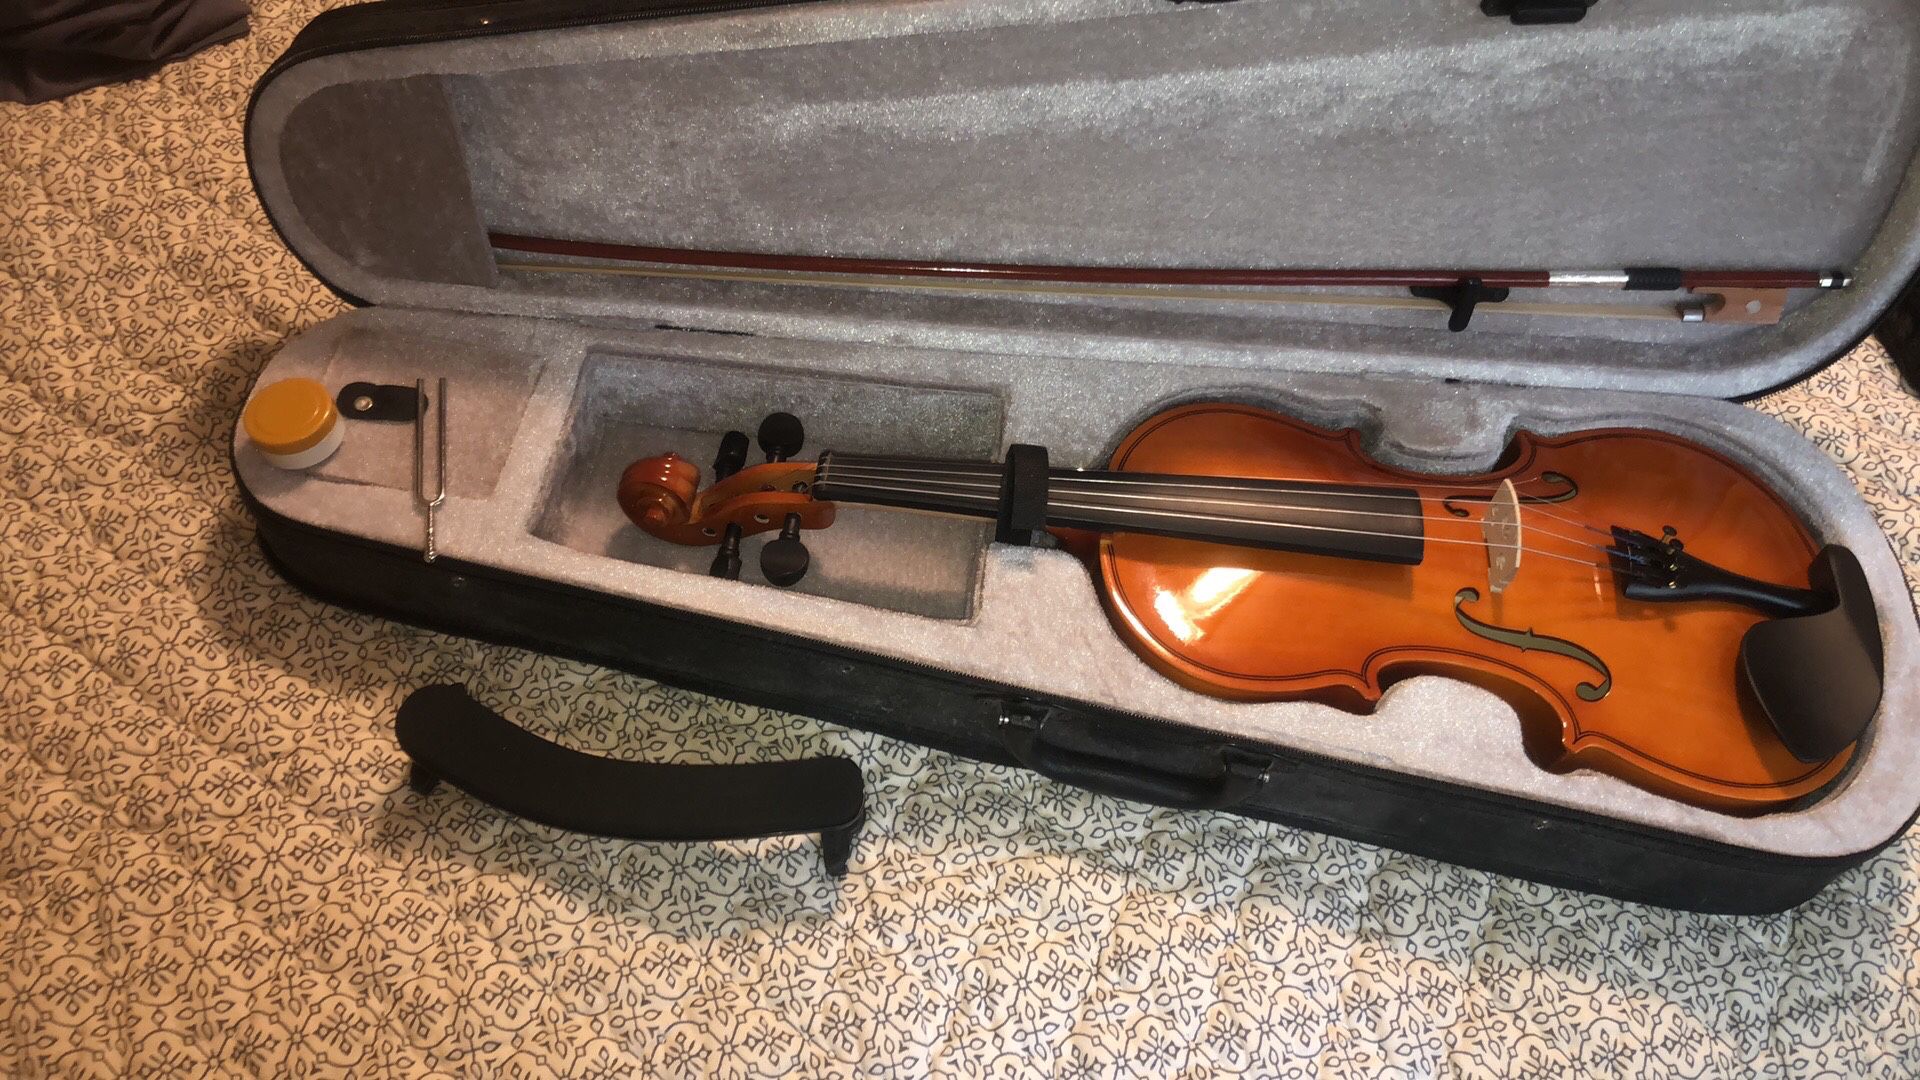 Full size (4/4) violin with case and all accessories